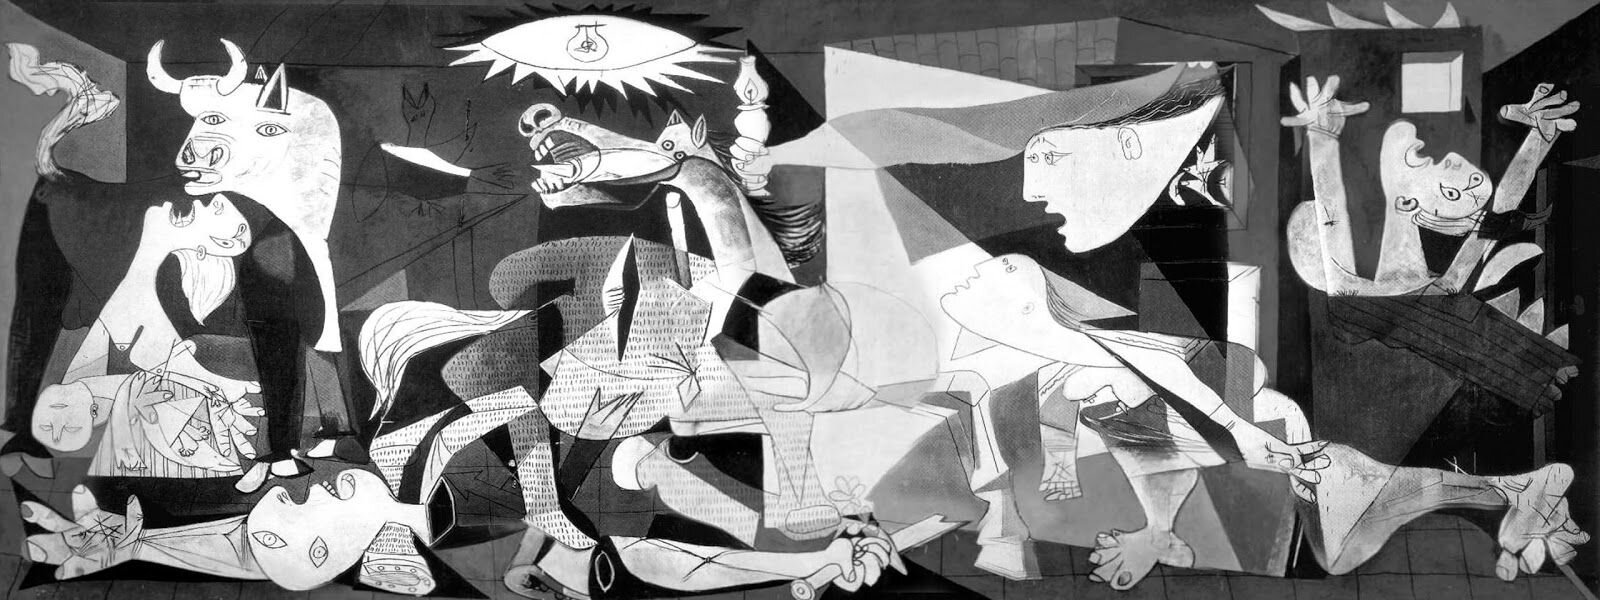 The Art of War: Examining Picasso